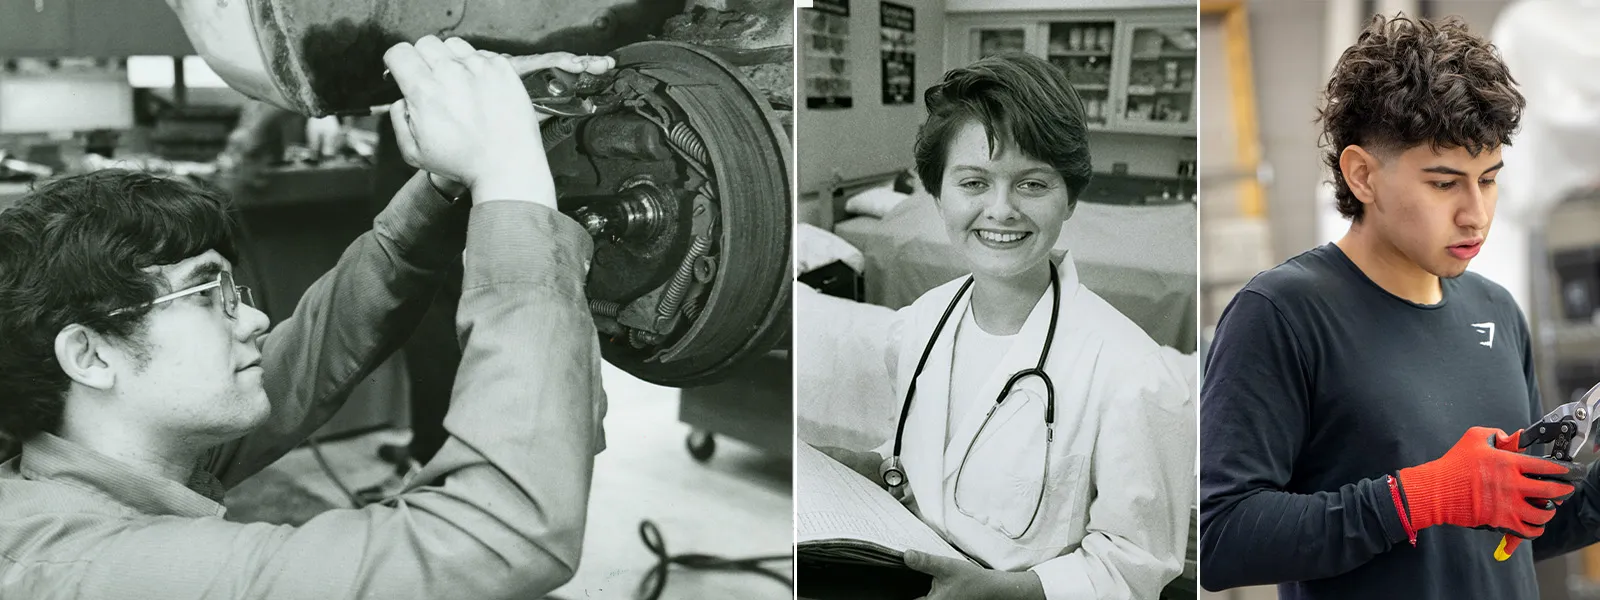 Collage of man working on brakes, a nurse and a sheet metal student.